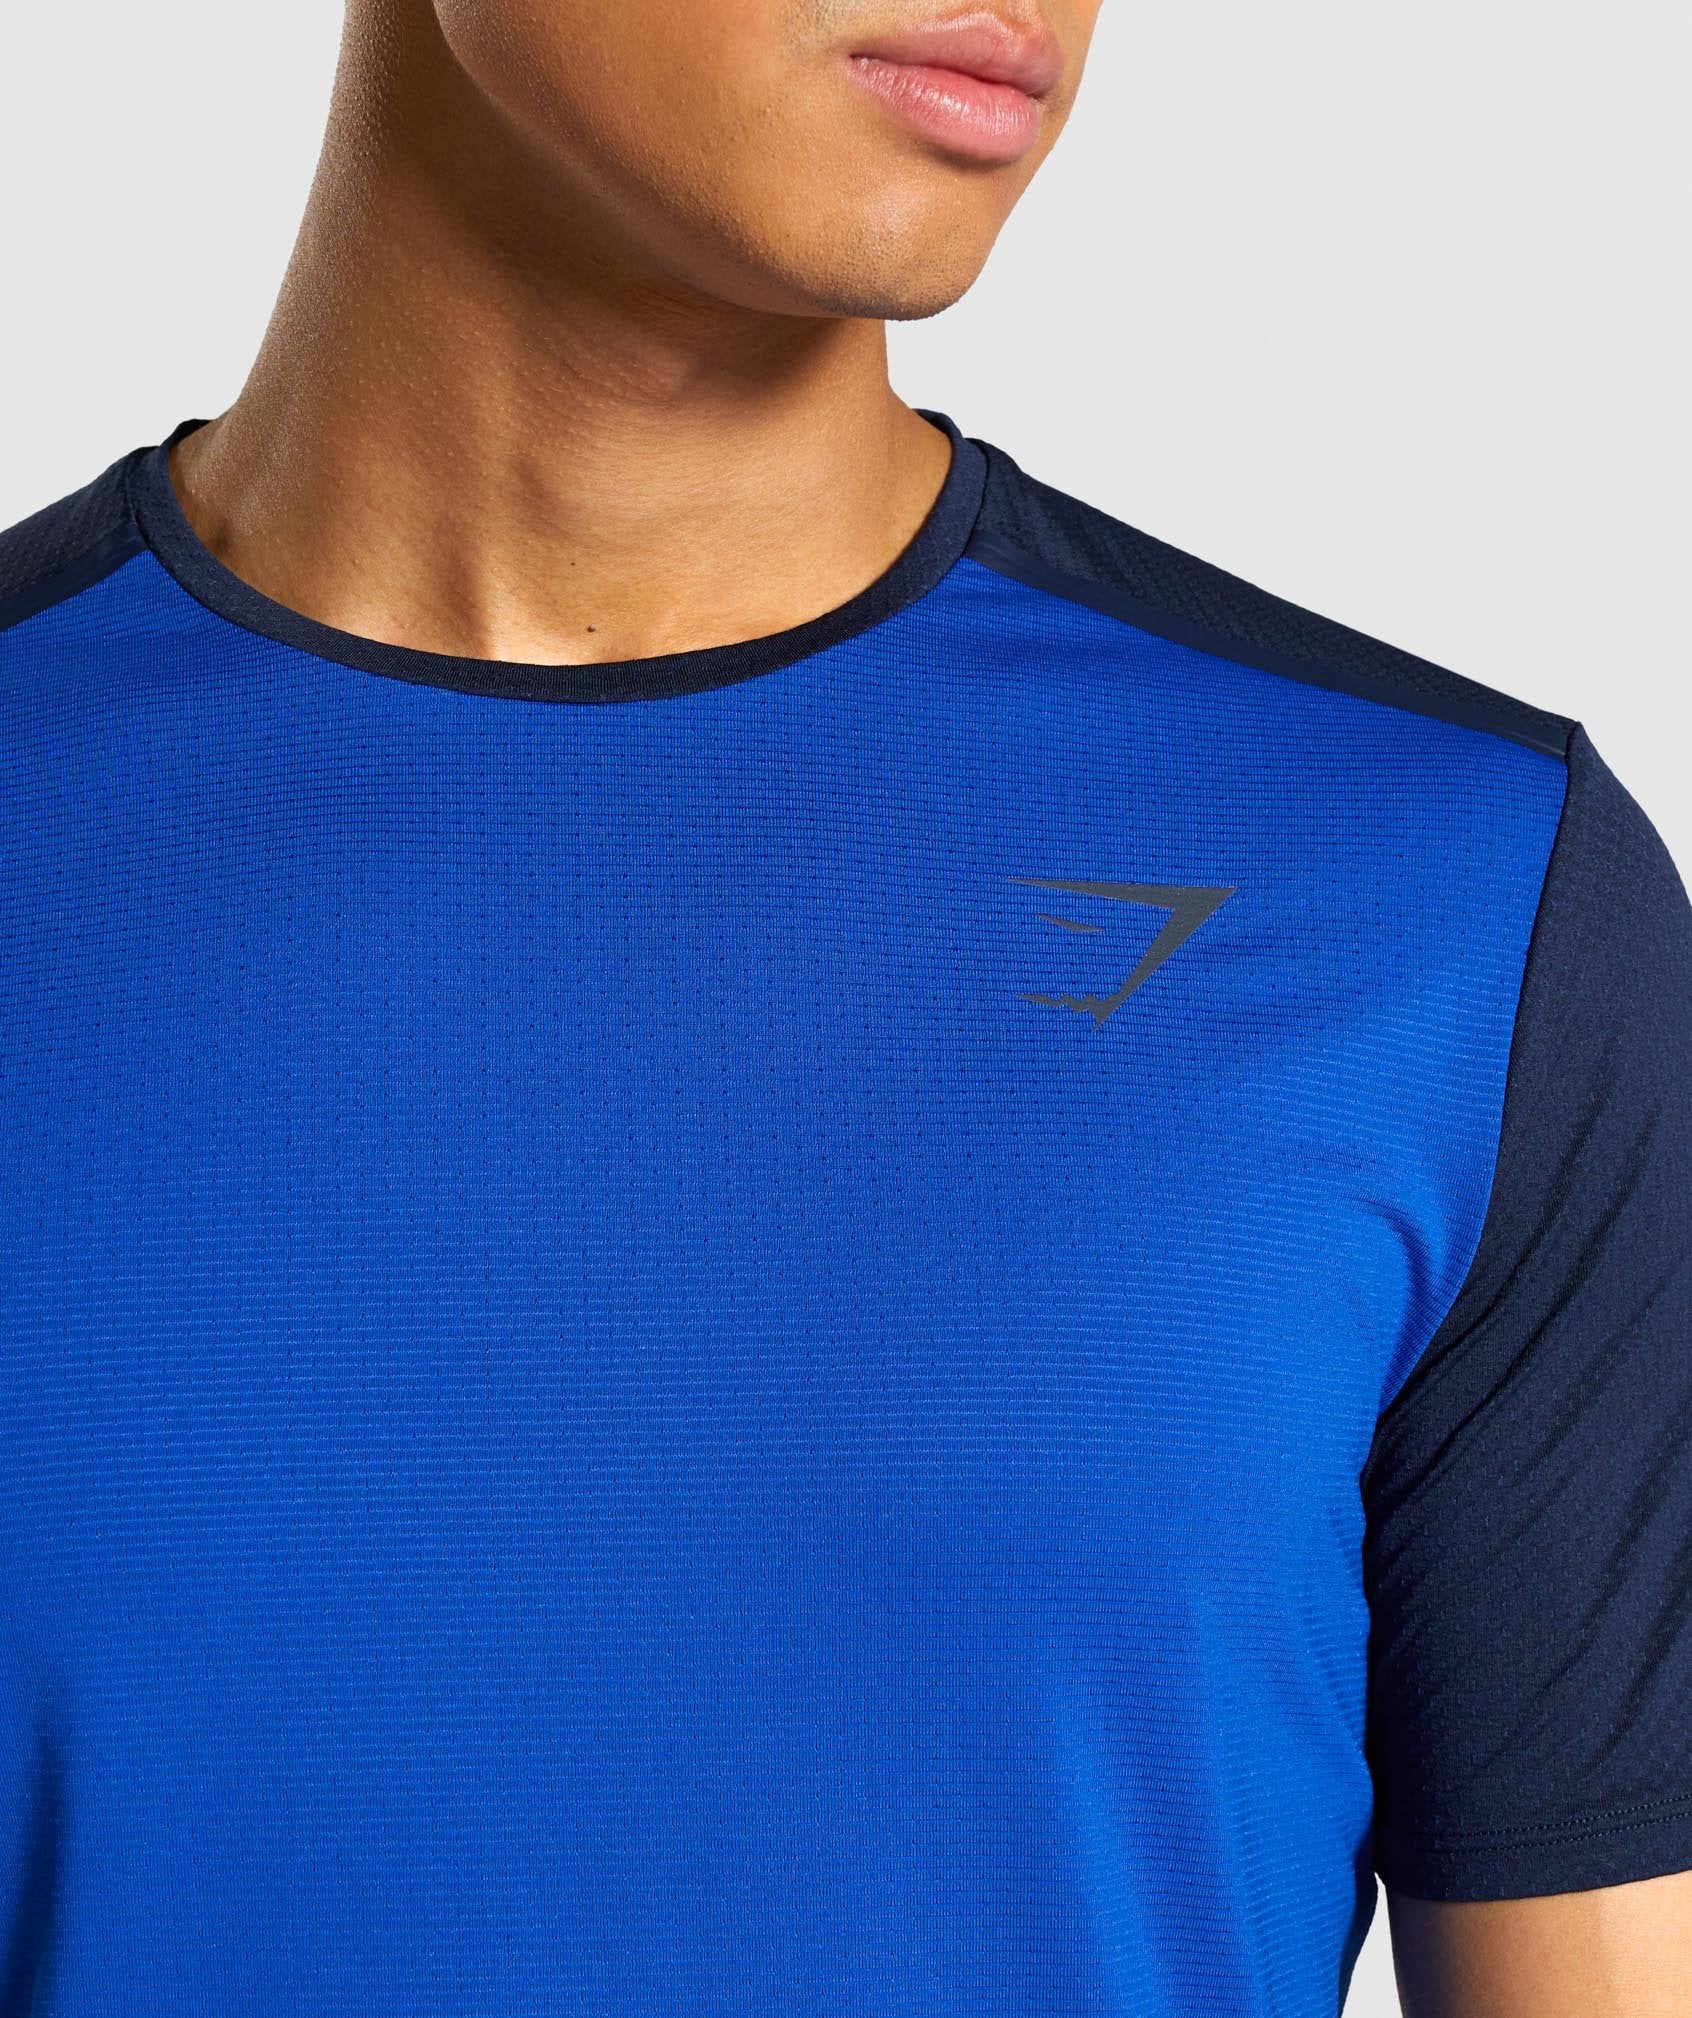 Speed T-Shirt in Blue - view 5